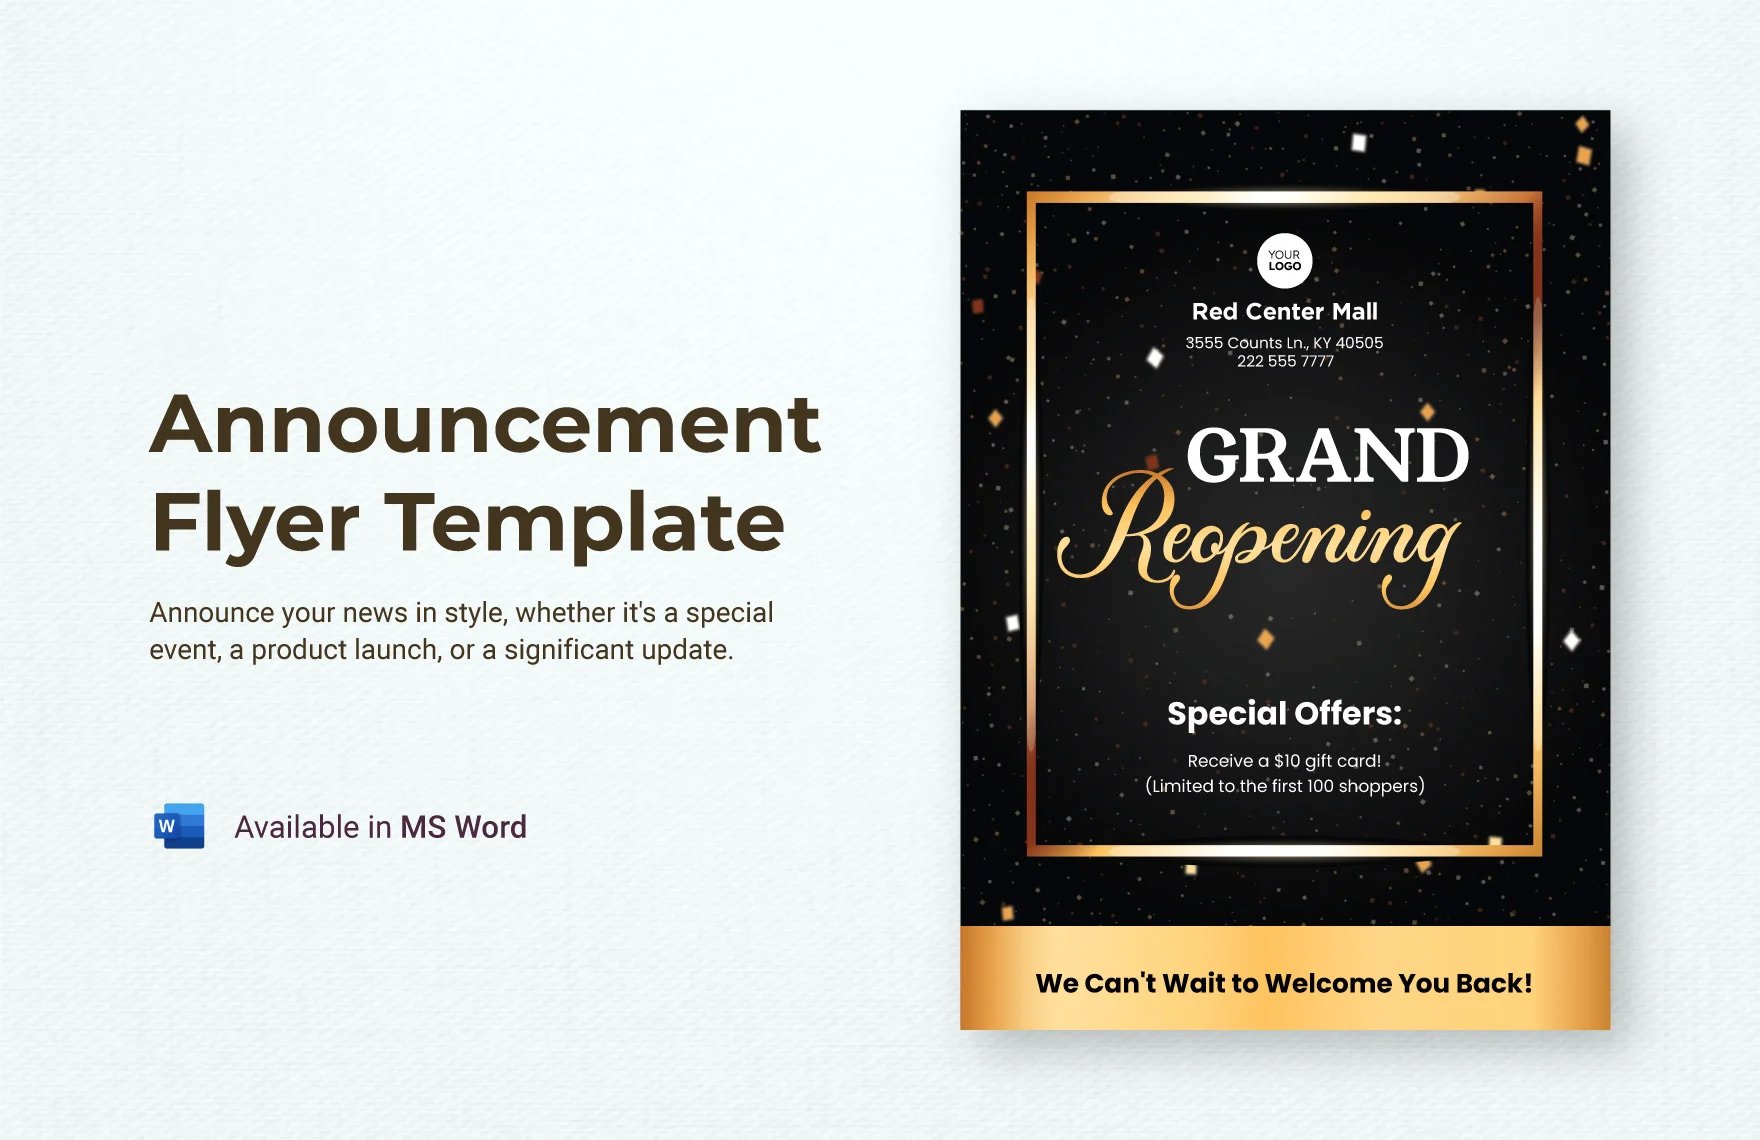 Free Announcement Flyer Template in Word